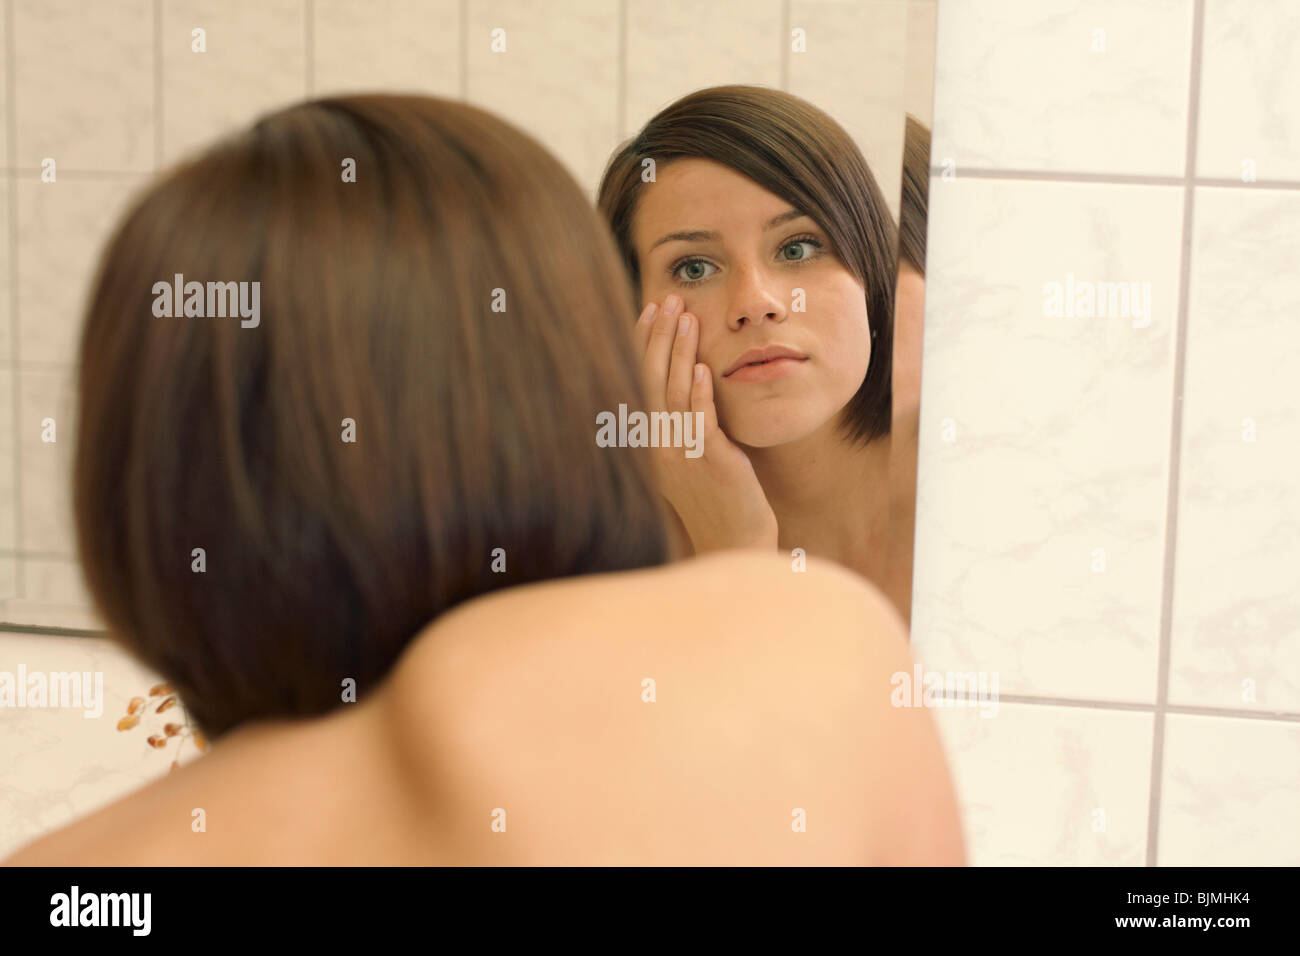 Woman, dark-haired, young, bathroom, mirror, look Stock Photo